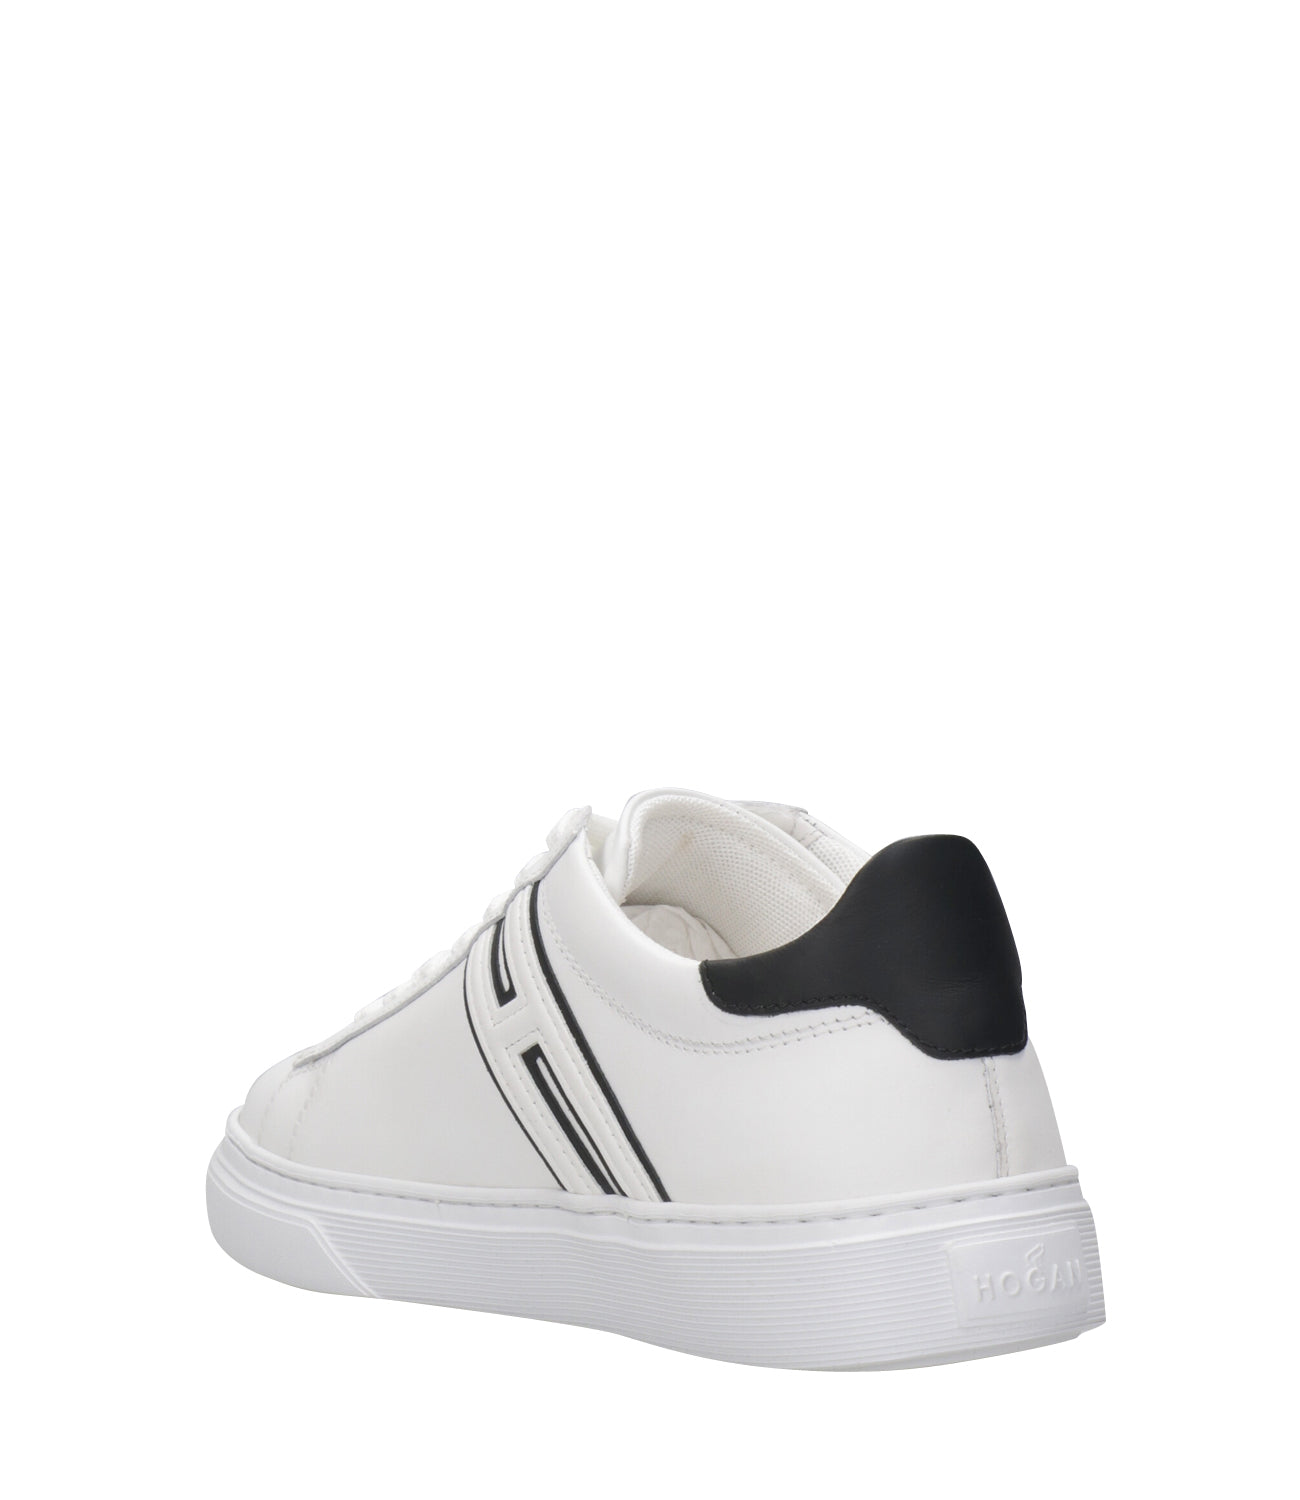 Hogan | Sneakers H365 Lace-up H Canaletto Black and White